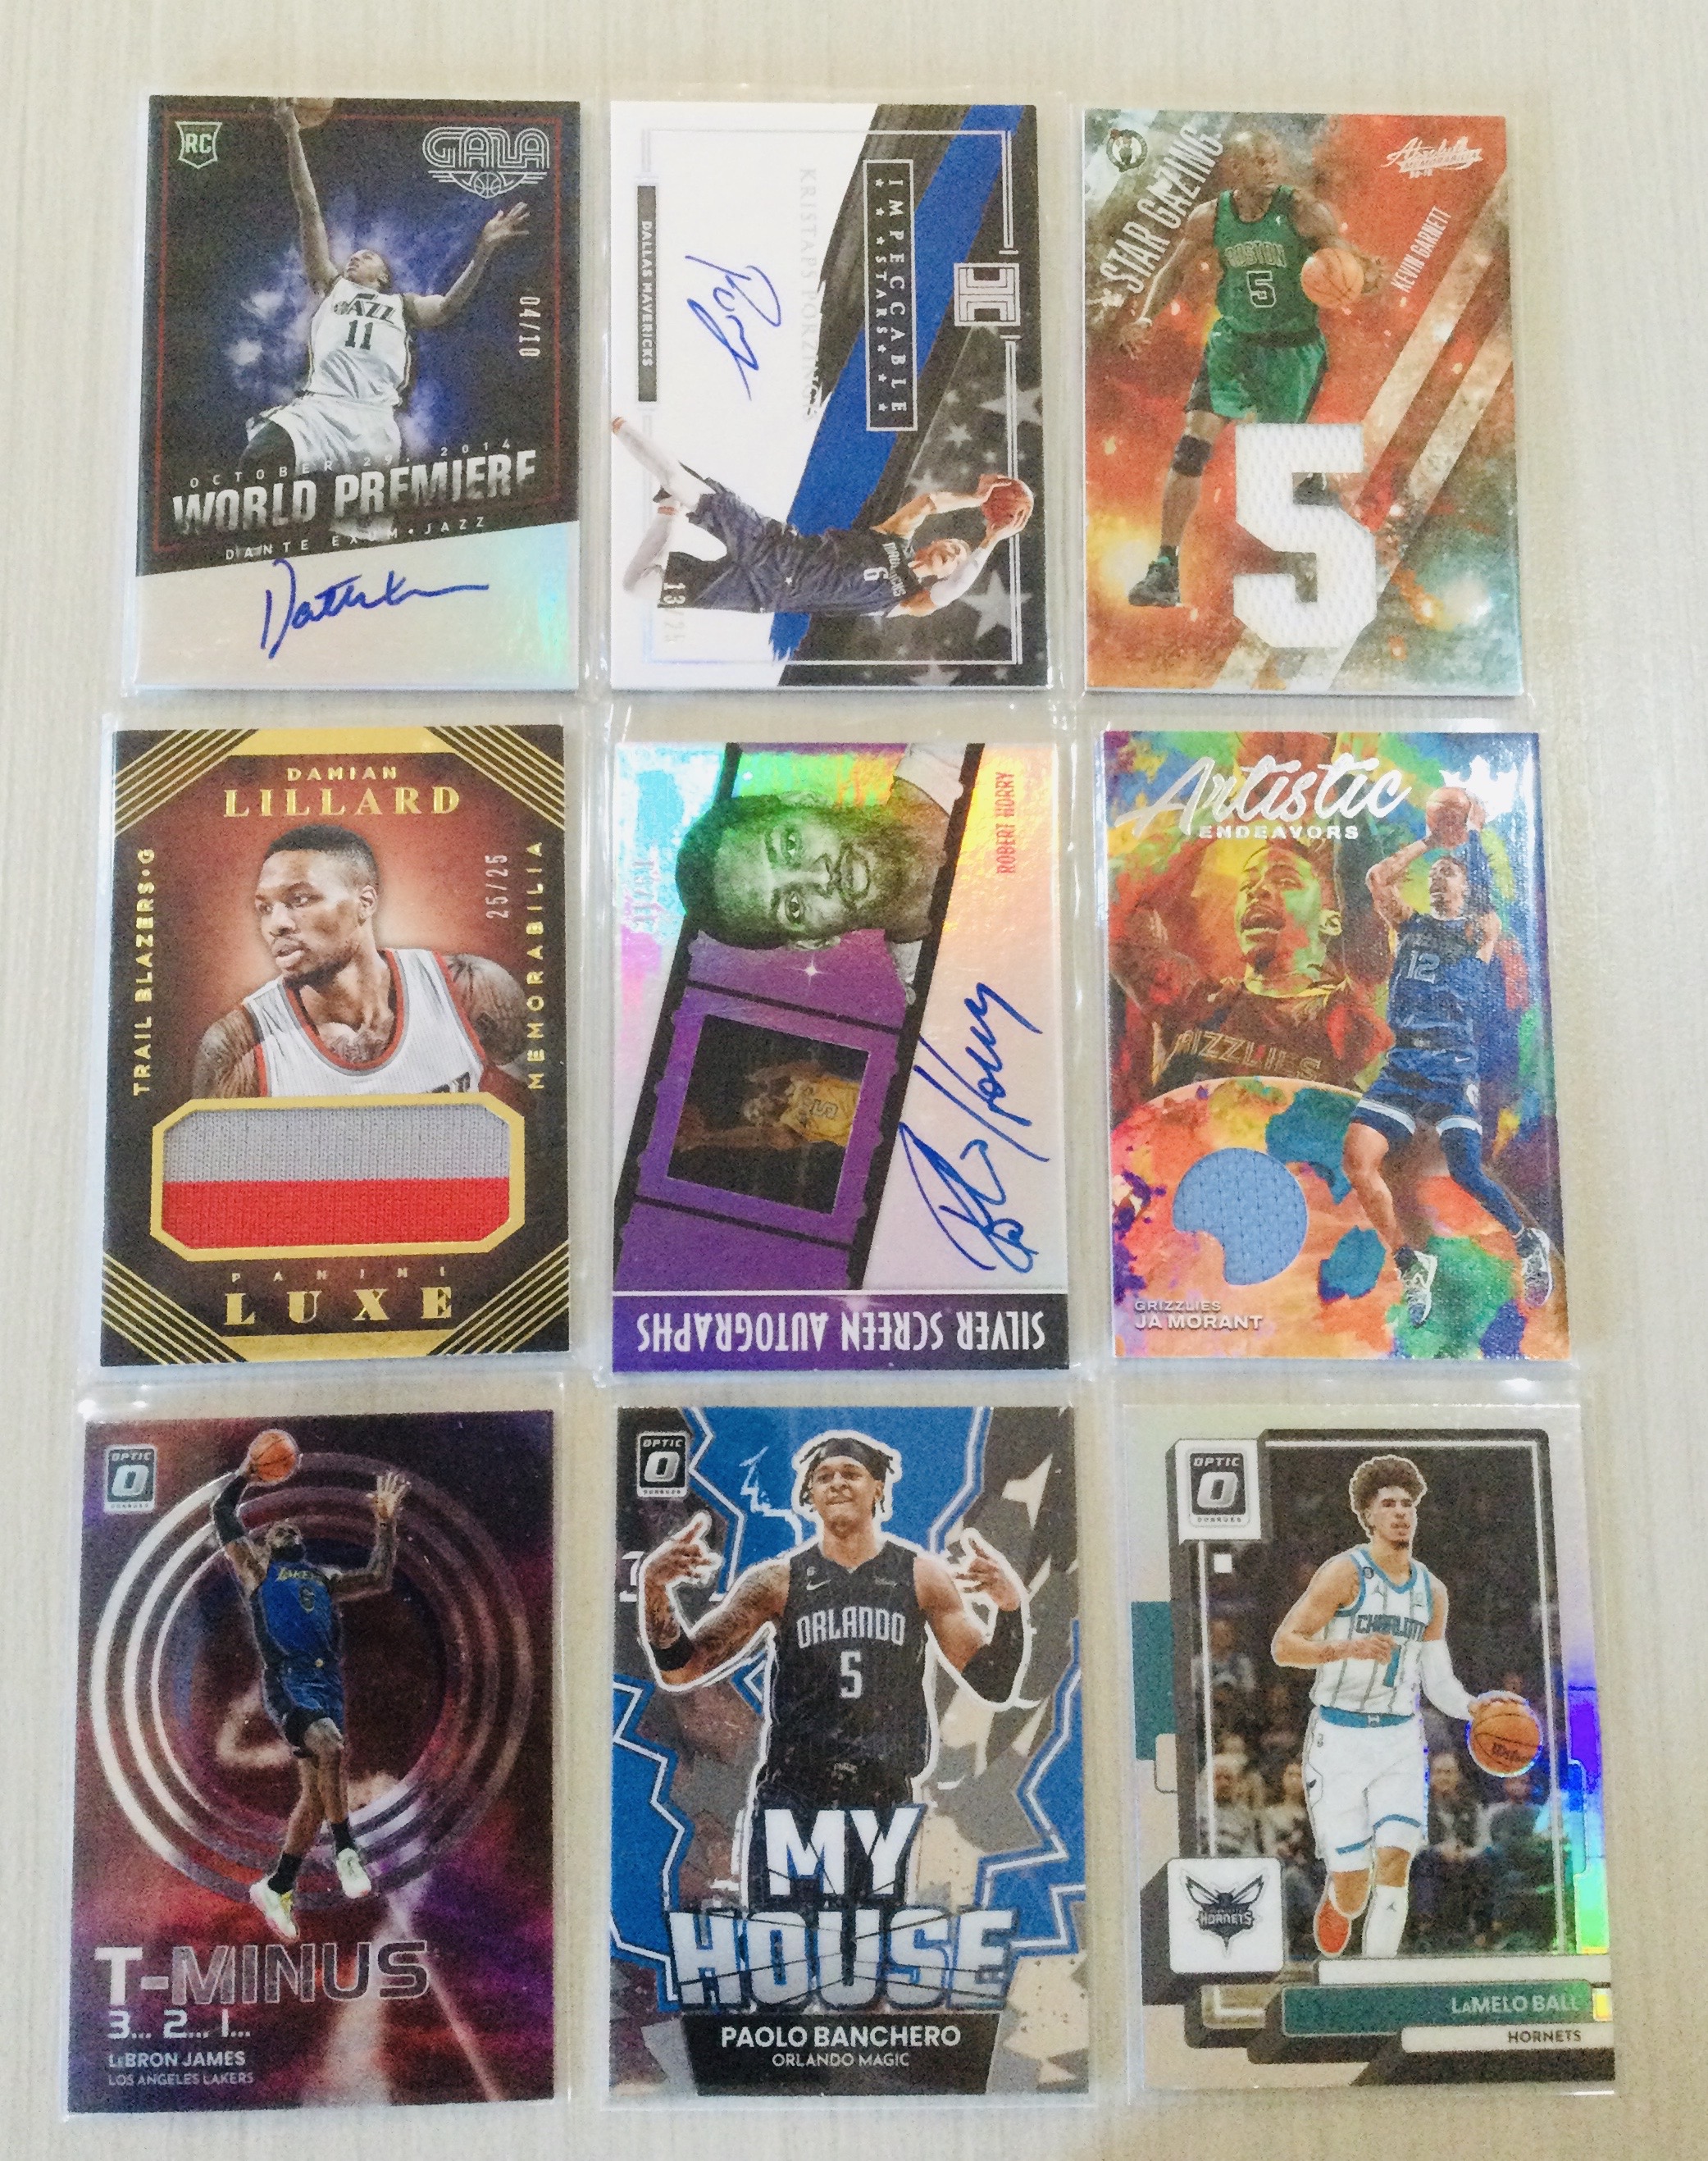 For Sale   Cards for sale  August th   Basketball   Selling